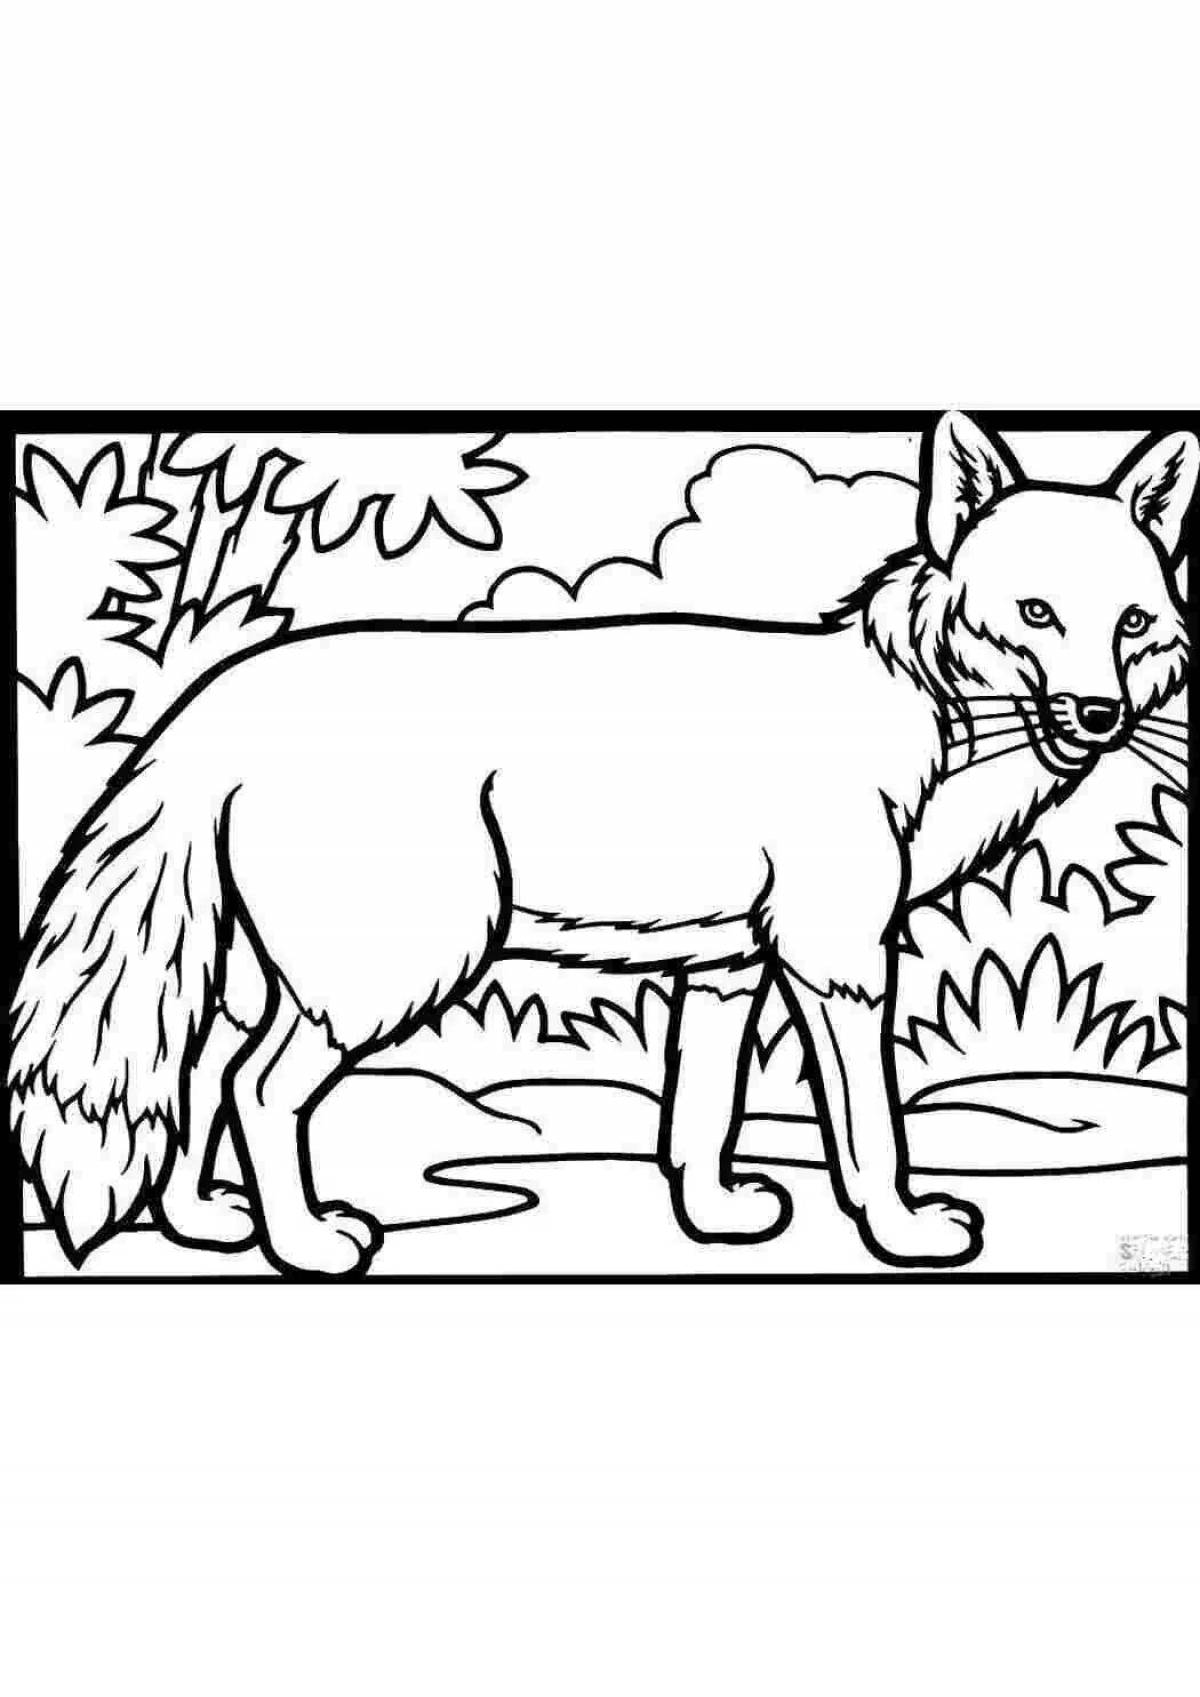 Cute fox coloring pages for kids